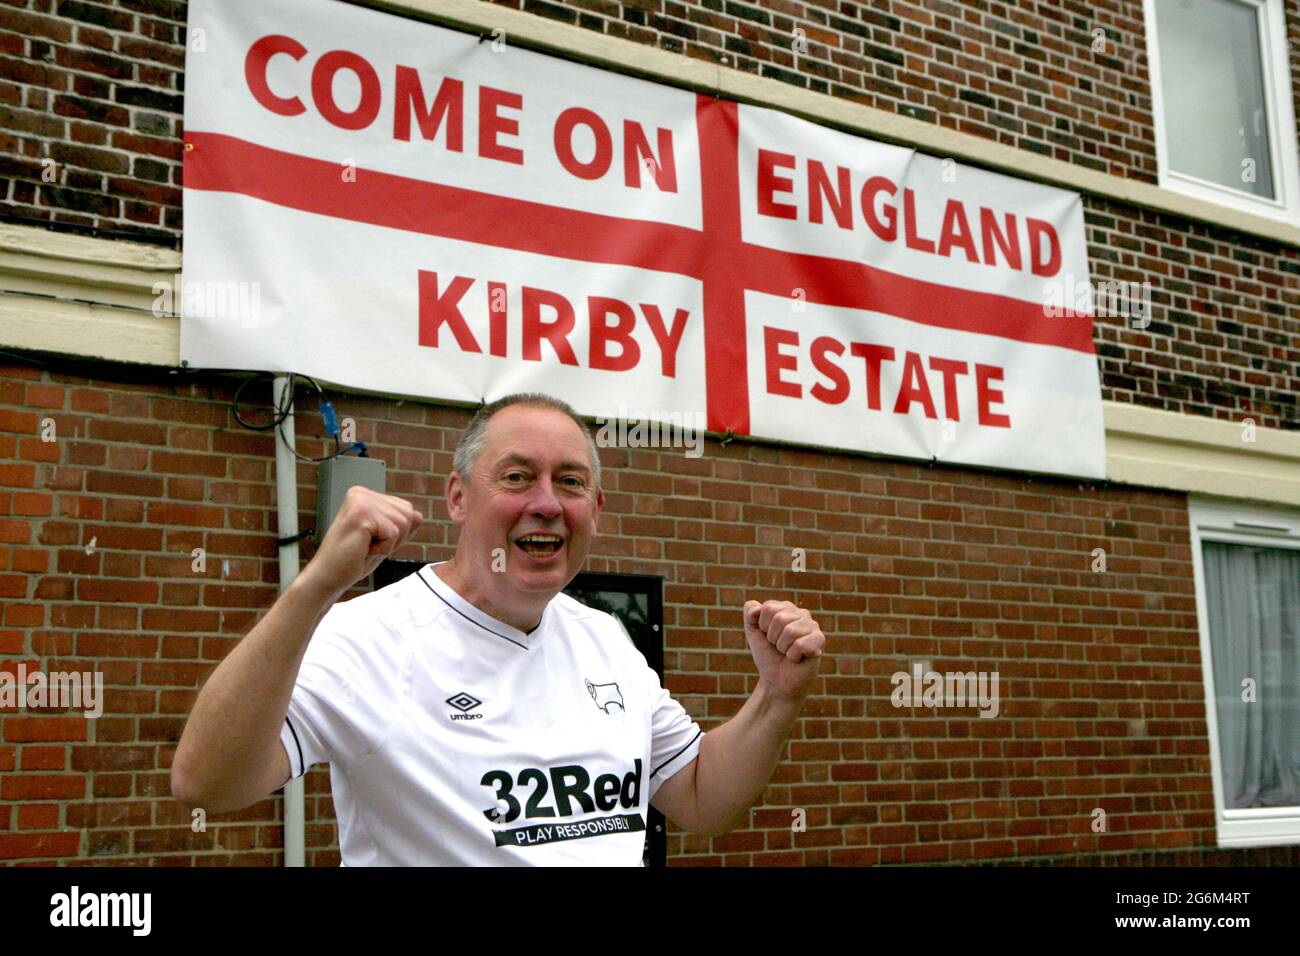 Paul Harpham who came from Nottingham to see the flags on the Kirby Estate in Bermondsey, south London, where residents are showing their support for England ahead of their game against Denmark at Wembley on Wednesday evening in the second semi-final of Euro 2020. Picture date: Wednesday July 7, 2021. Stock Photo